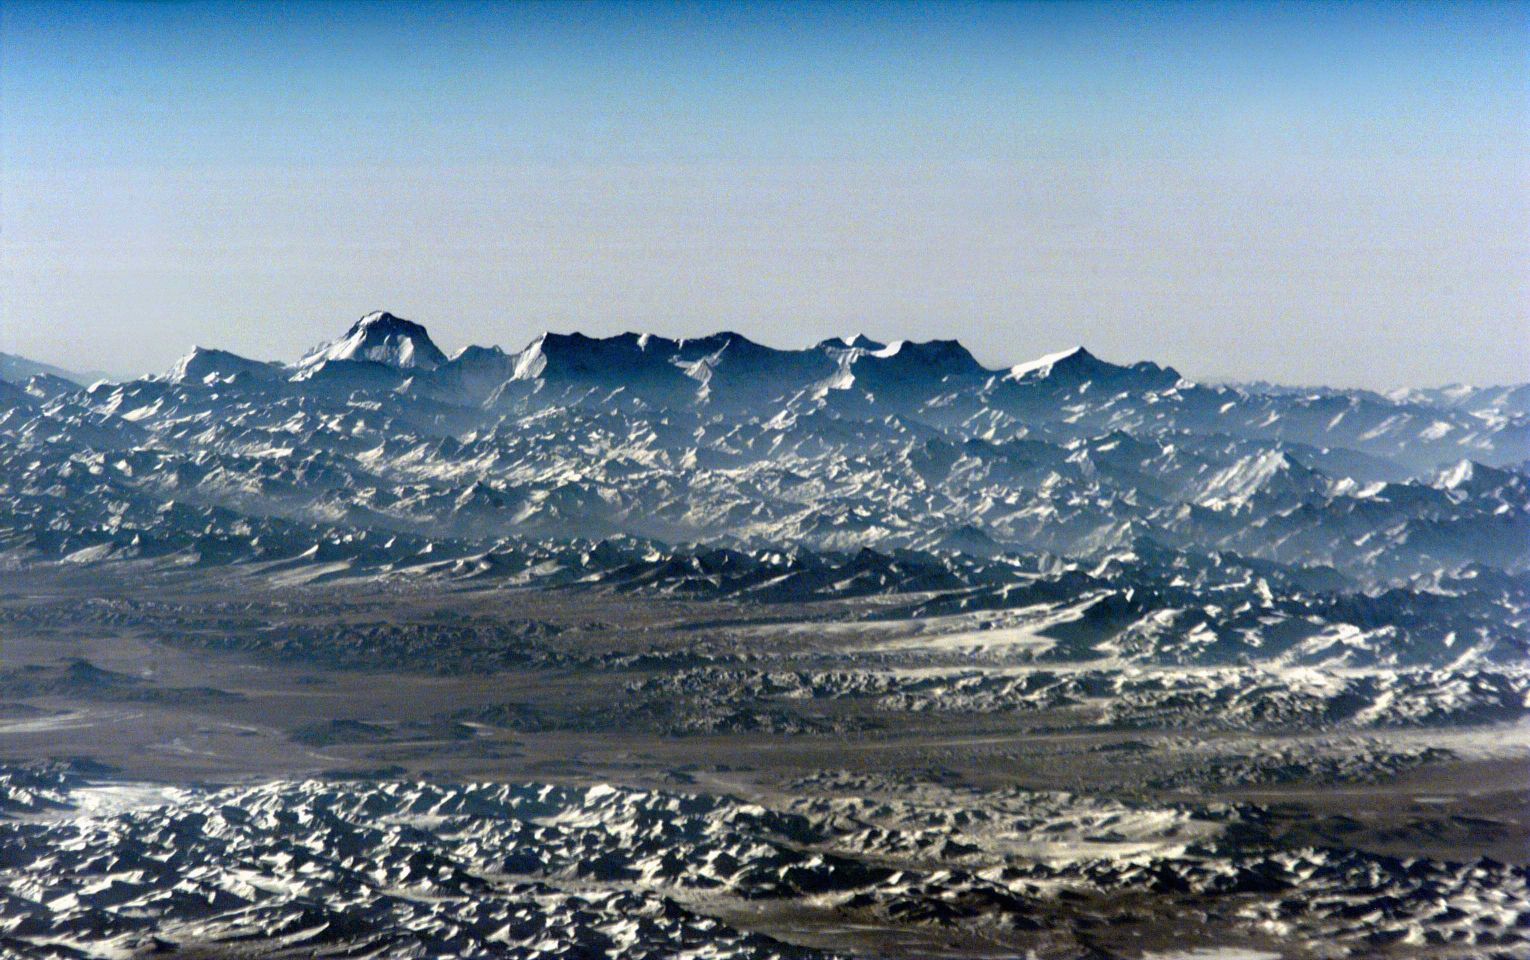 Mount Dhaulagiri as seen from 200 miles up from SpaceShuttle 